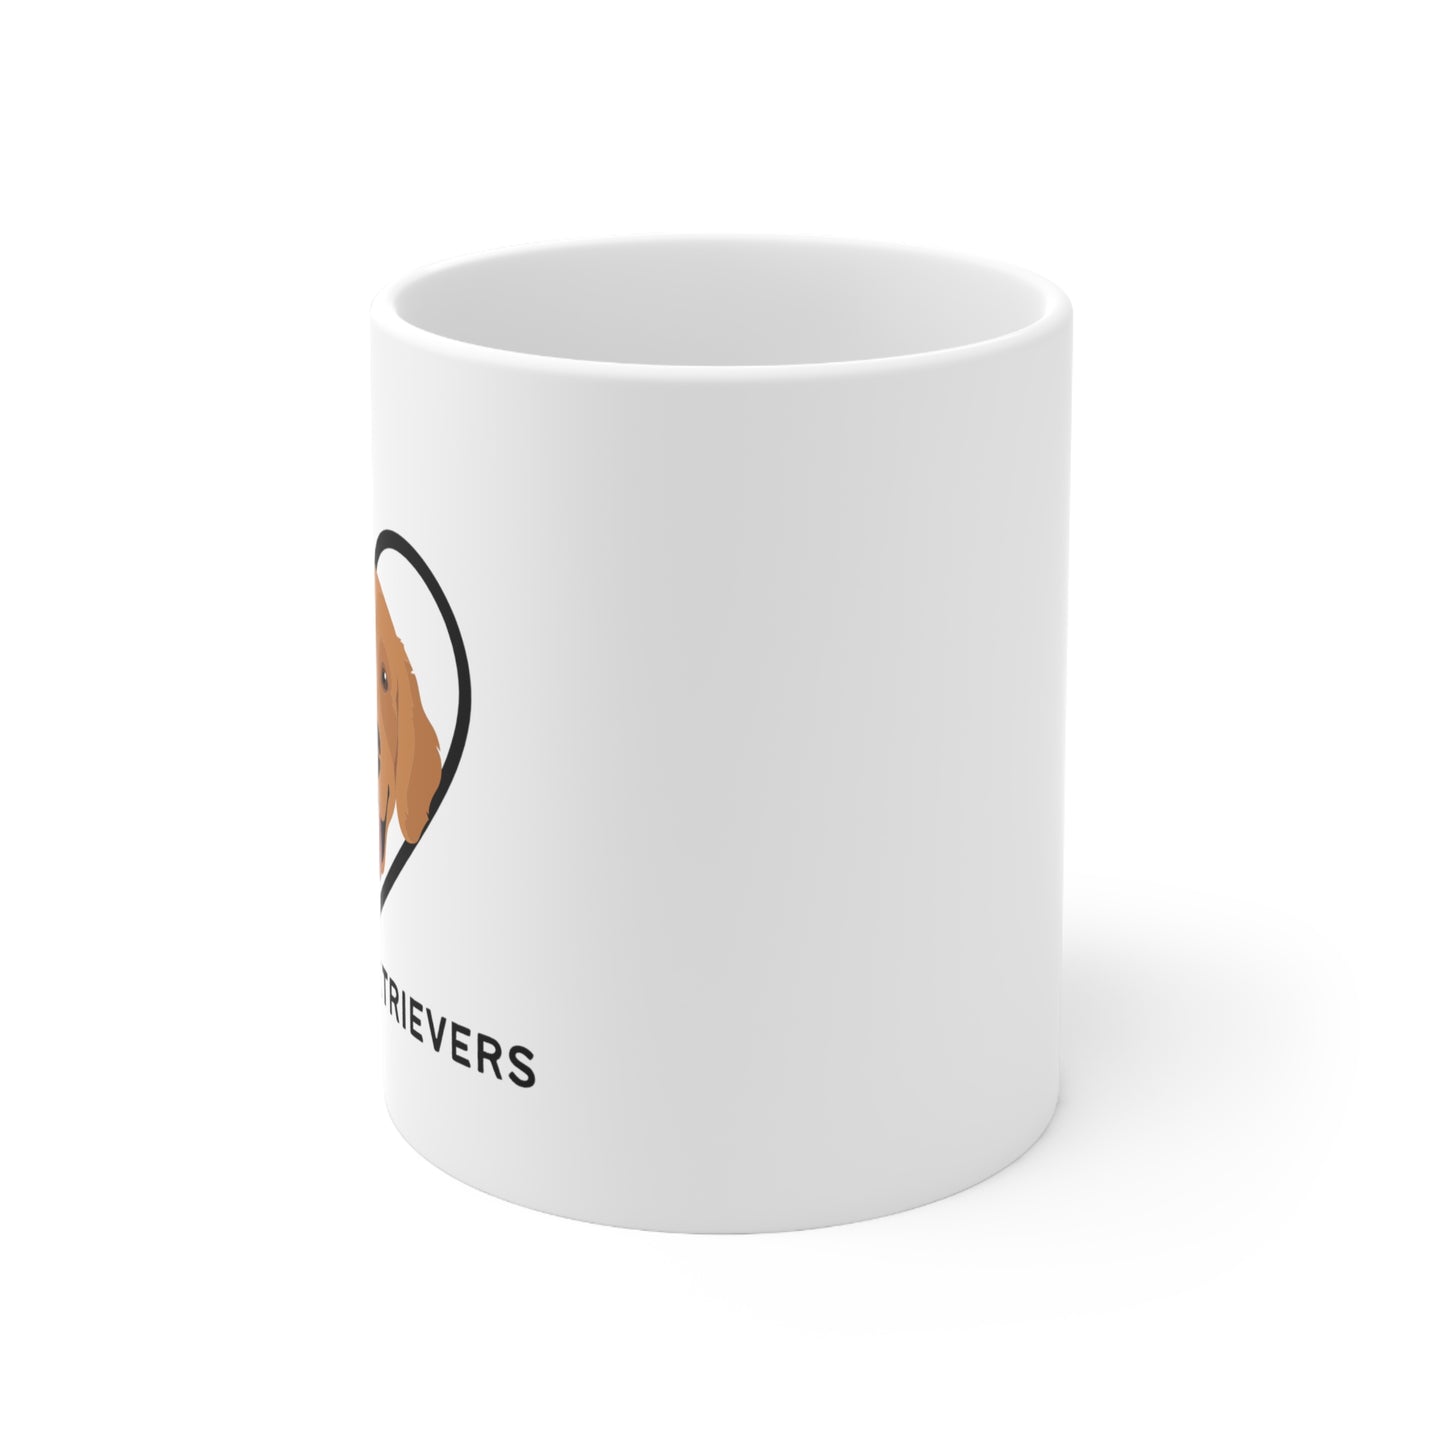 "I Love Golden Retrievers" Coffee Mug - Weave Got Gifts - Unique Gifts You Won’t Find Anywhere Else!